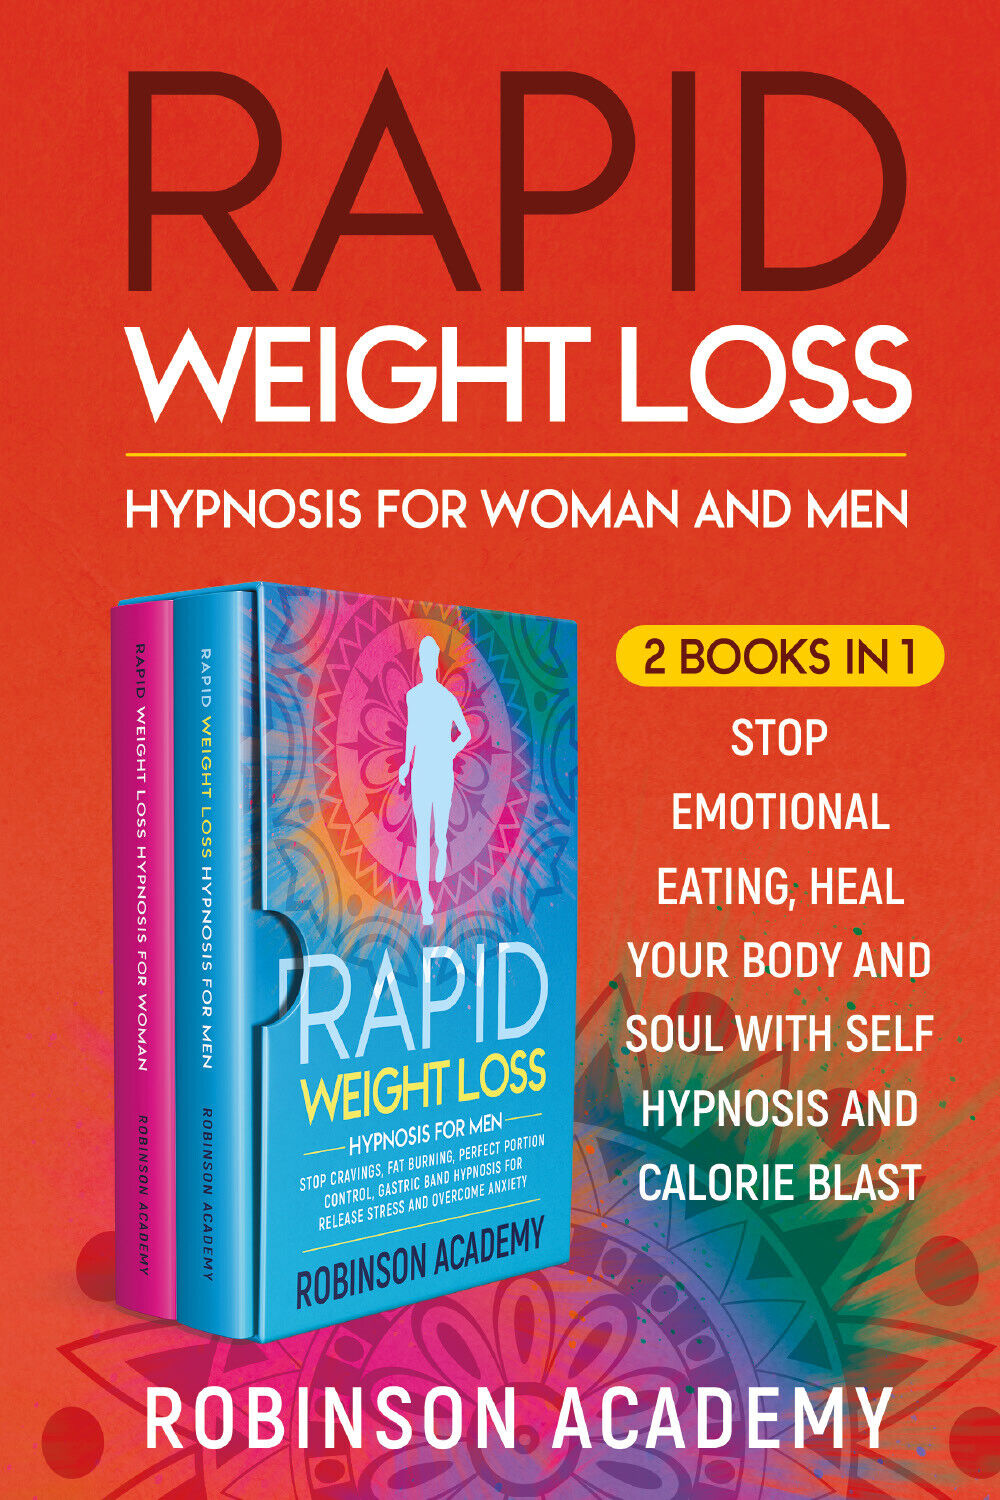 Rapid Weight Loss Hypnosis for Woman and Men (2 Books in 1) di Robinson Academy, libro usato